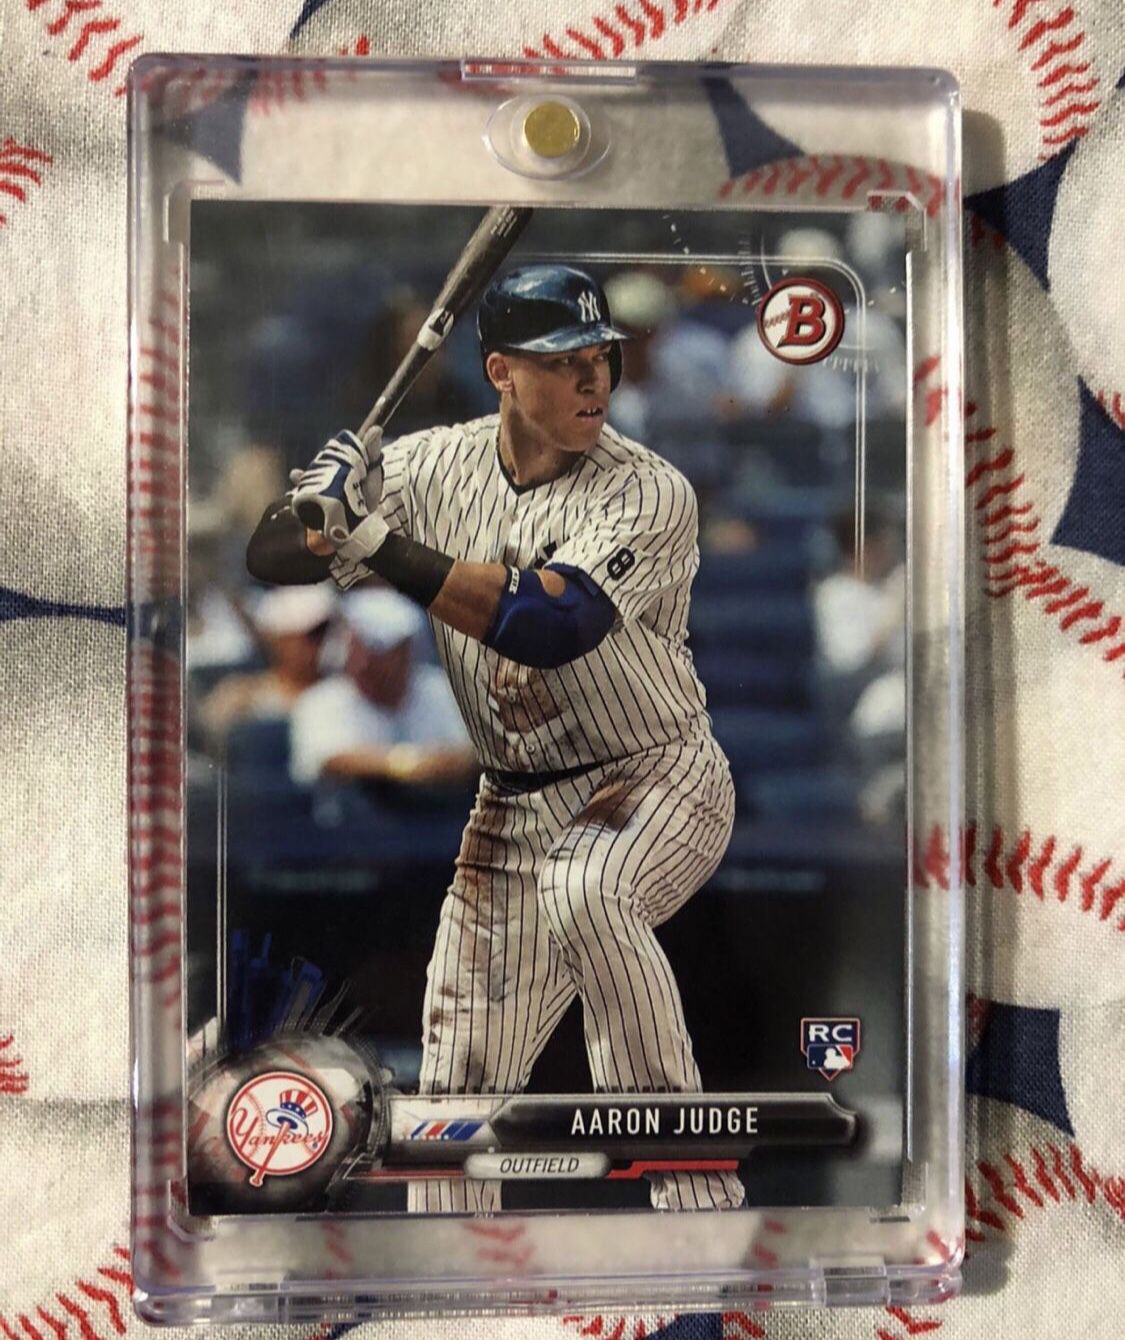 Aaron Judge Rookie Card for Sale in Hanford, CA - OfferUp